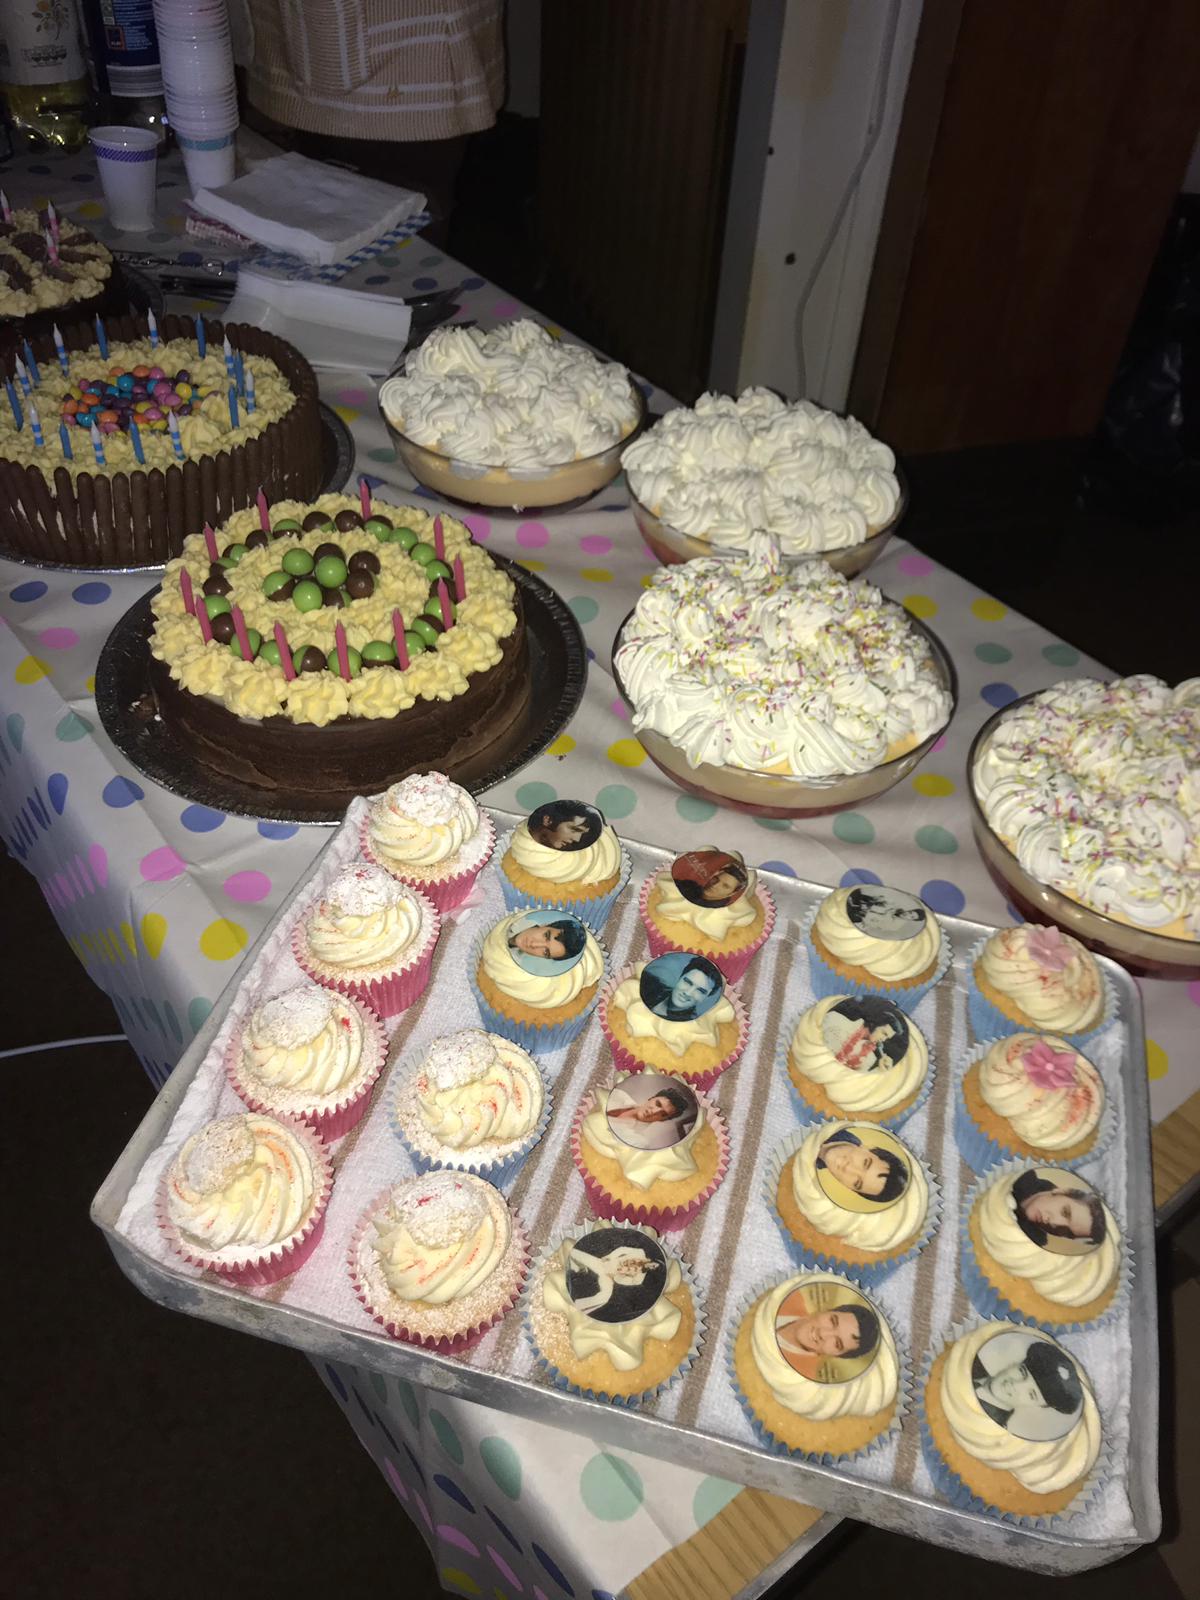 Triple Birthday Celebrations at Victoria House: Key Healthcare is dedicated to caring for elderly residents in safe. We have multiple dementia care homes including our care home middlesbrough, our care home St. Helen and care home saltburn. We excel in monitoring and improving care levels.